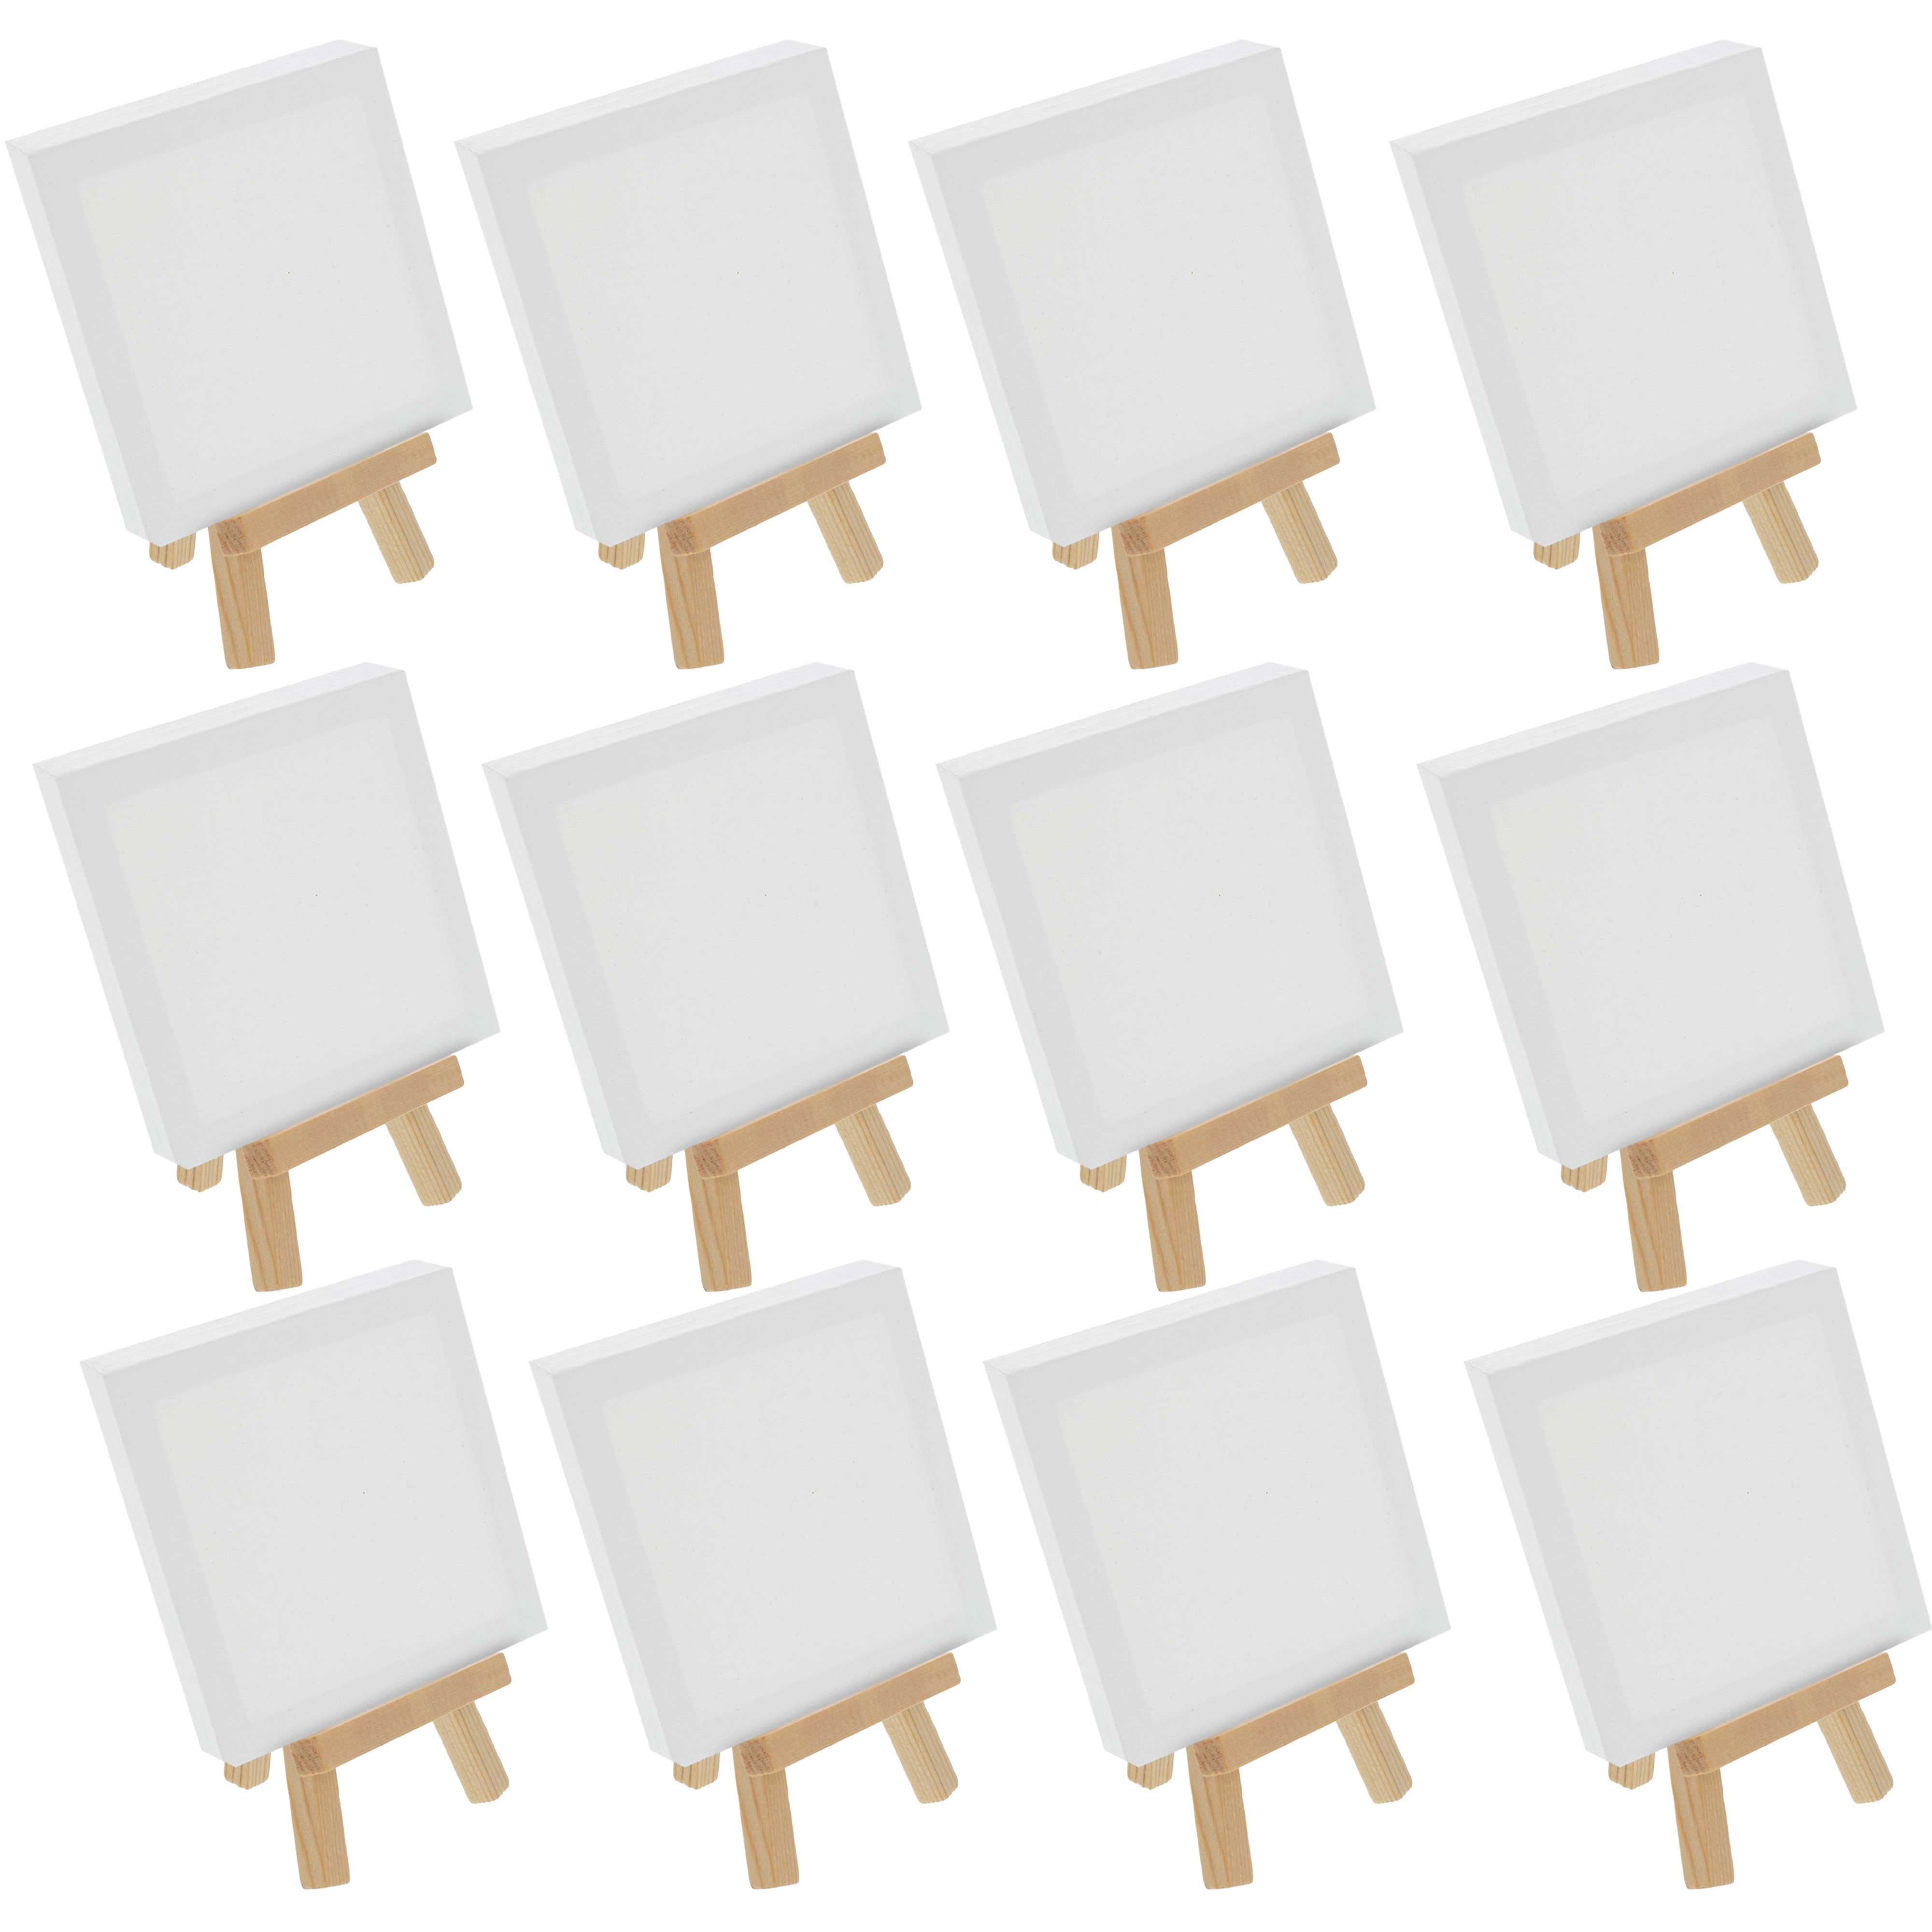 Art Decoration Craft Drawing Milisten 2 Set Canvas for Painting with Easel Mini Canvas Easel Set Foldable Wood Smooth Painting Set Academy Art Supplies Tabletop Holder Stand for Painting Party